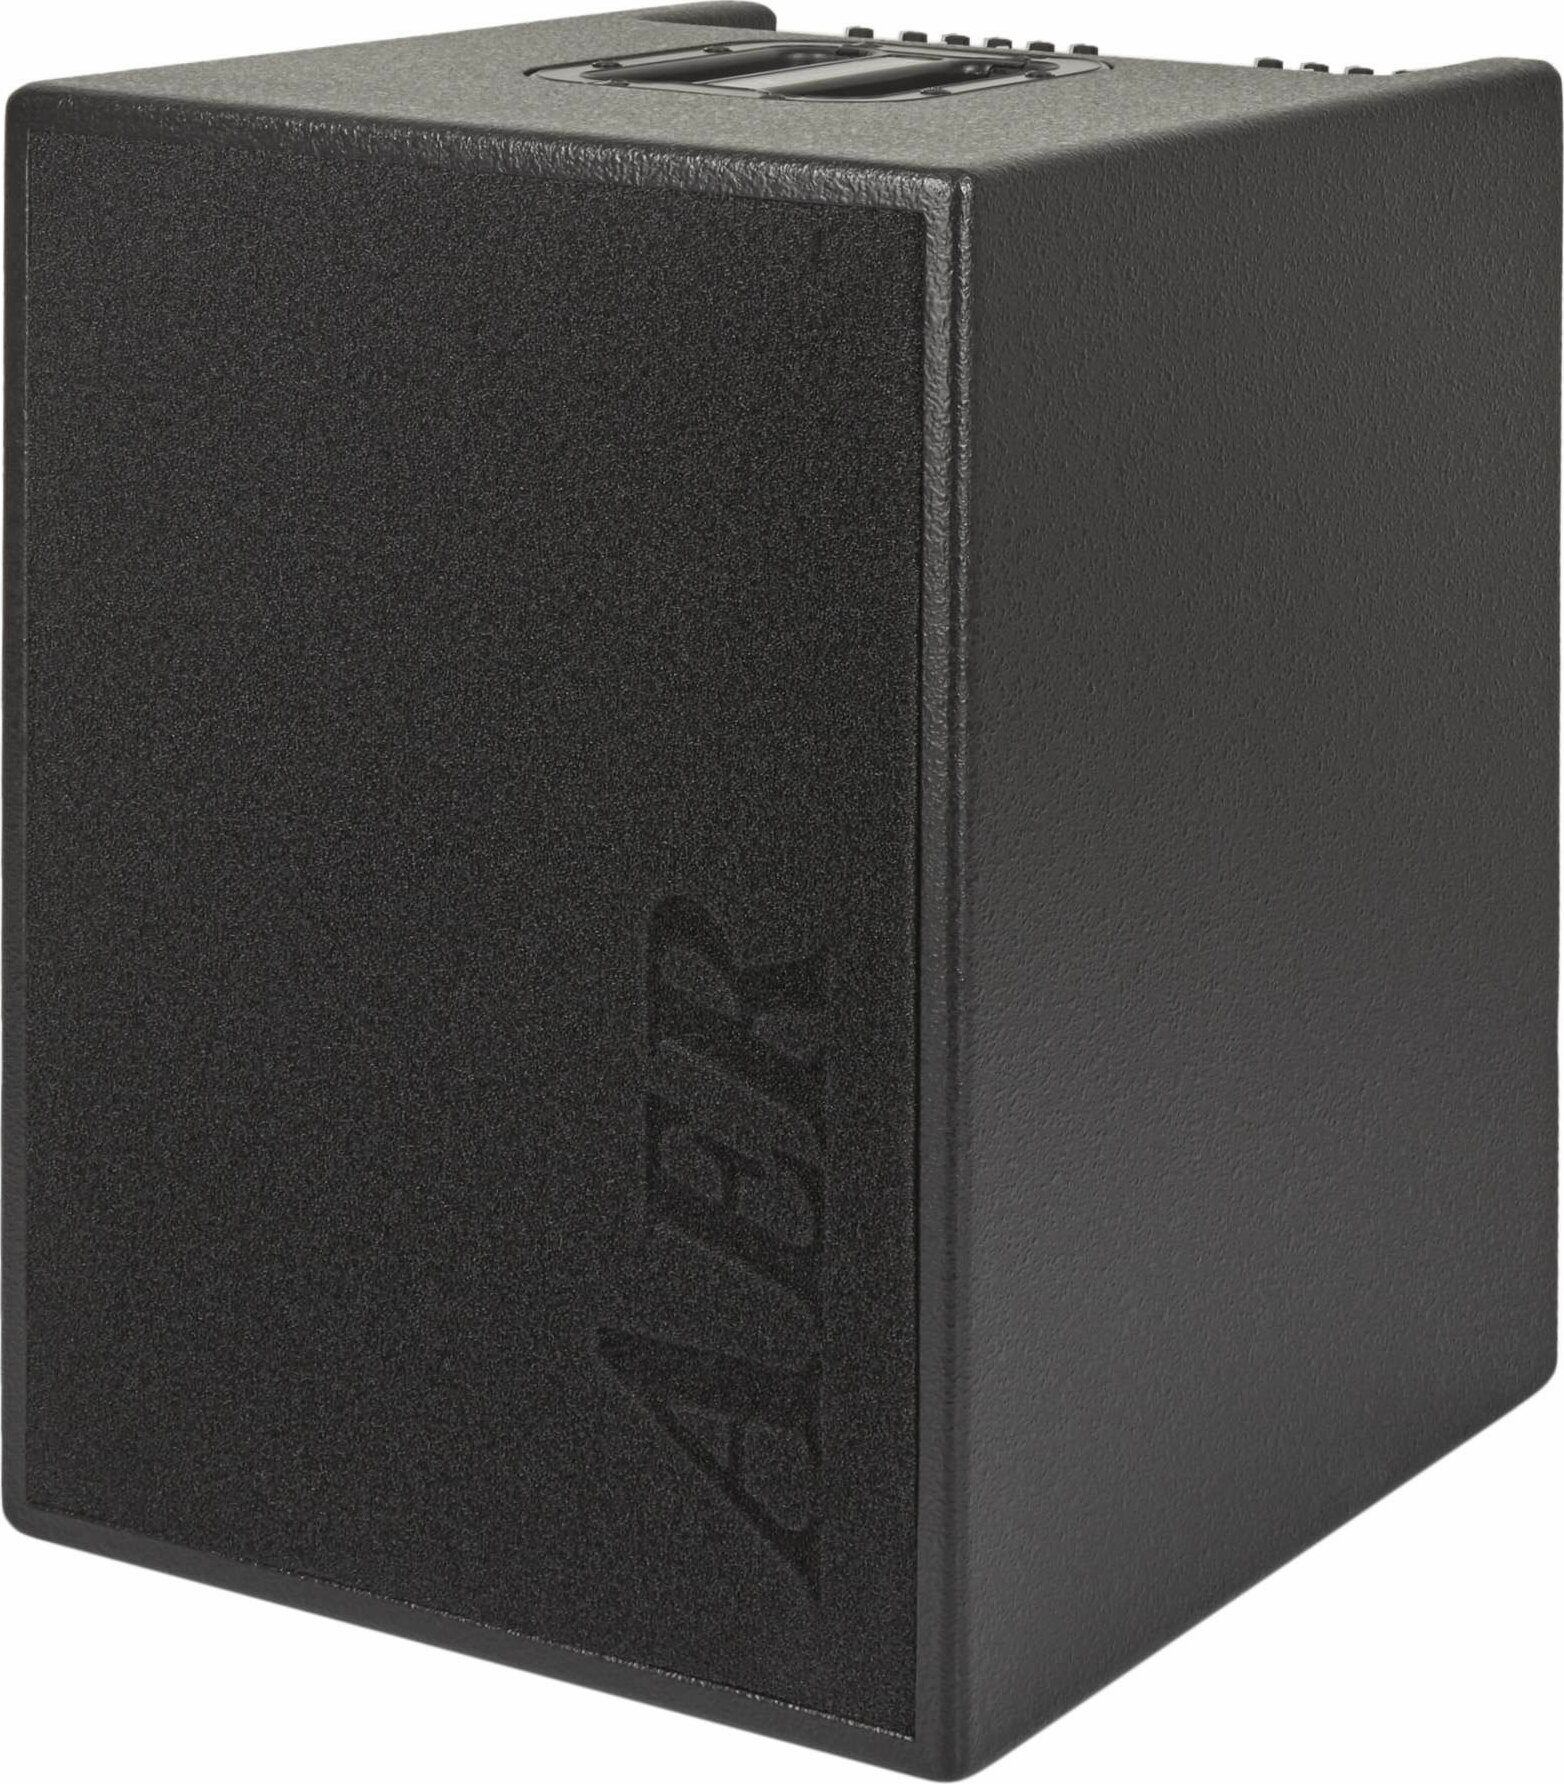 Aer Basic Performer 2 200w 4x8 Black +housse - Bass combo amp - Main picture